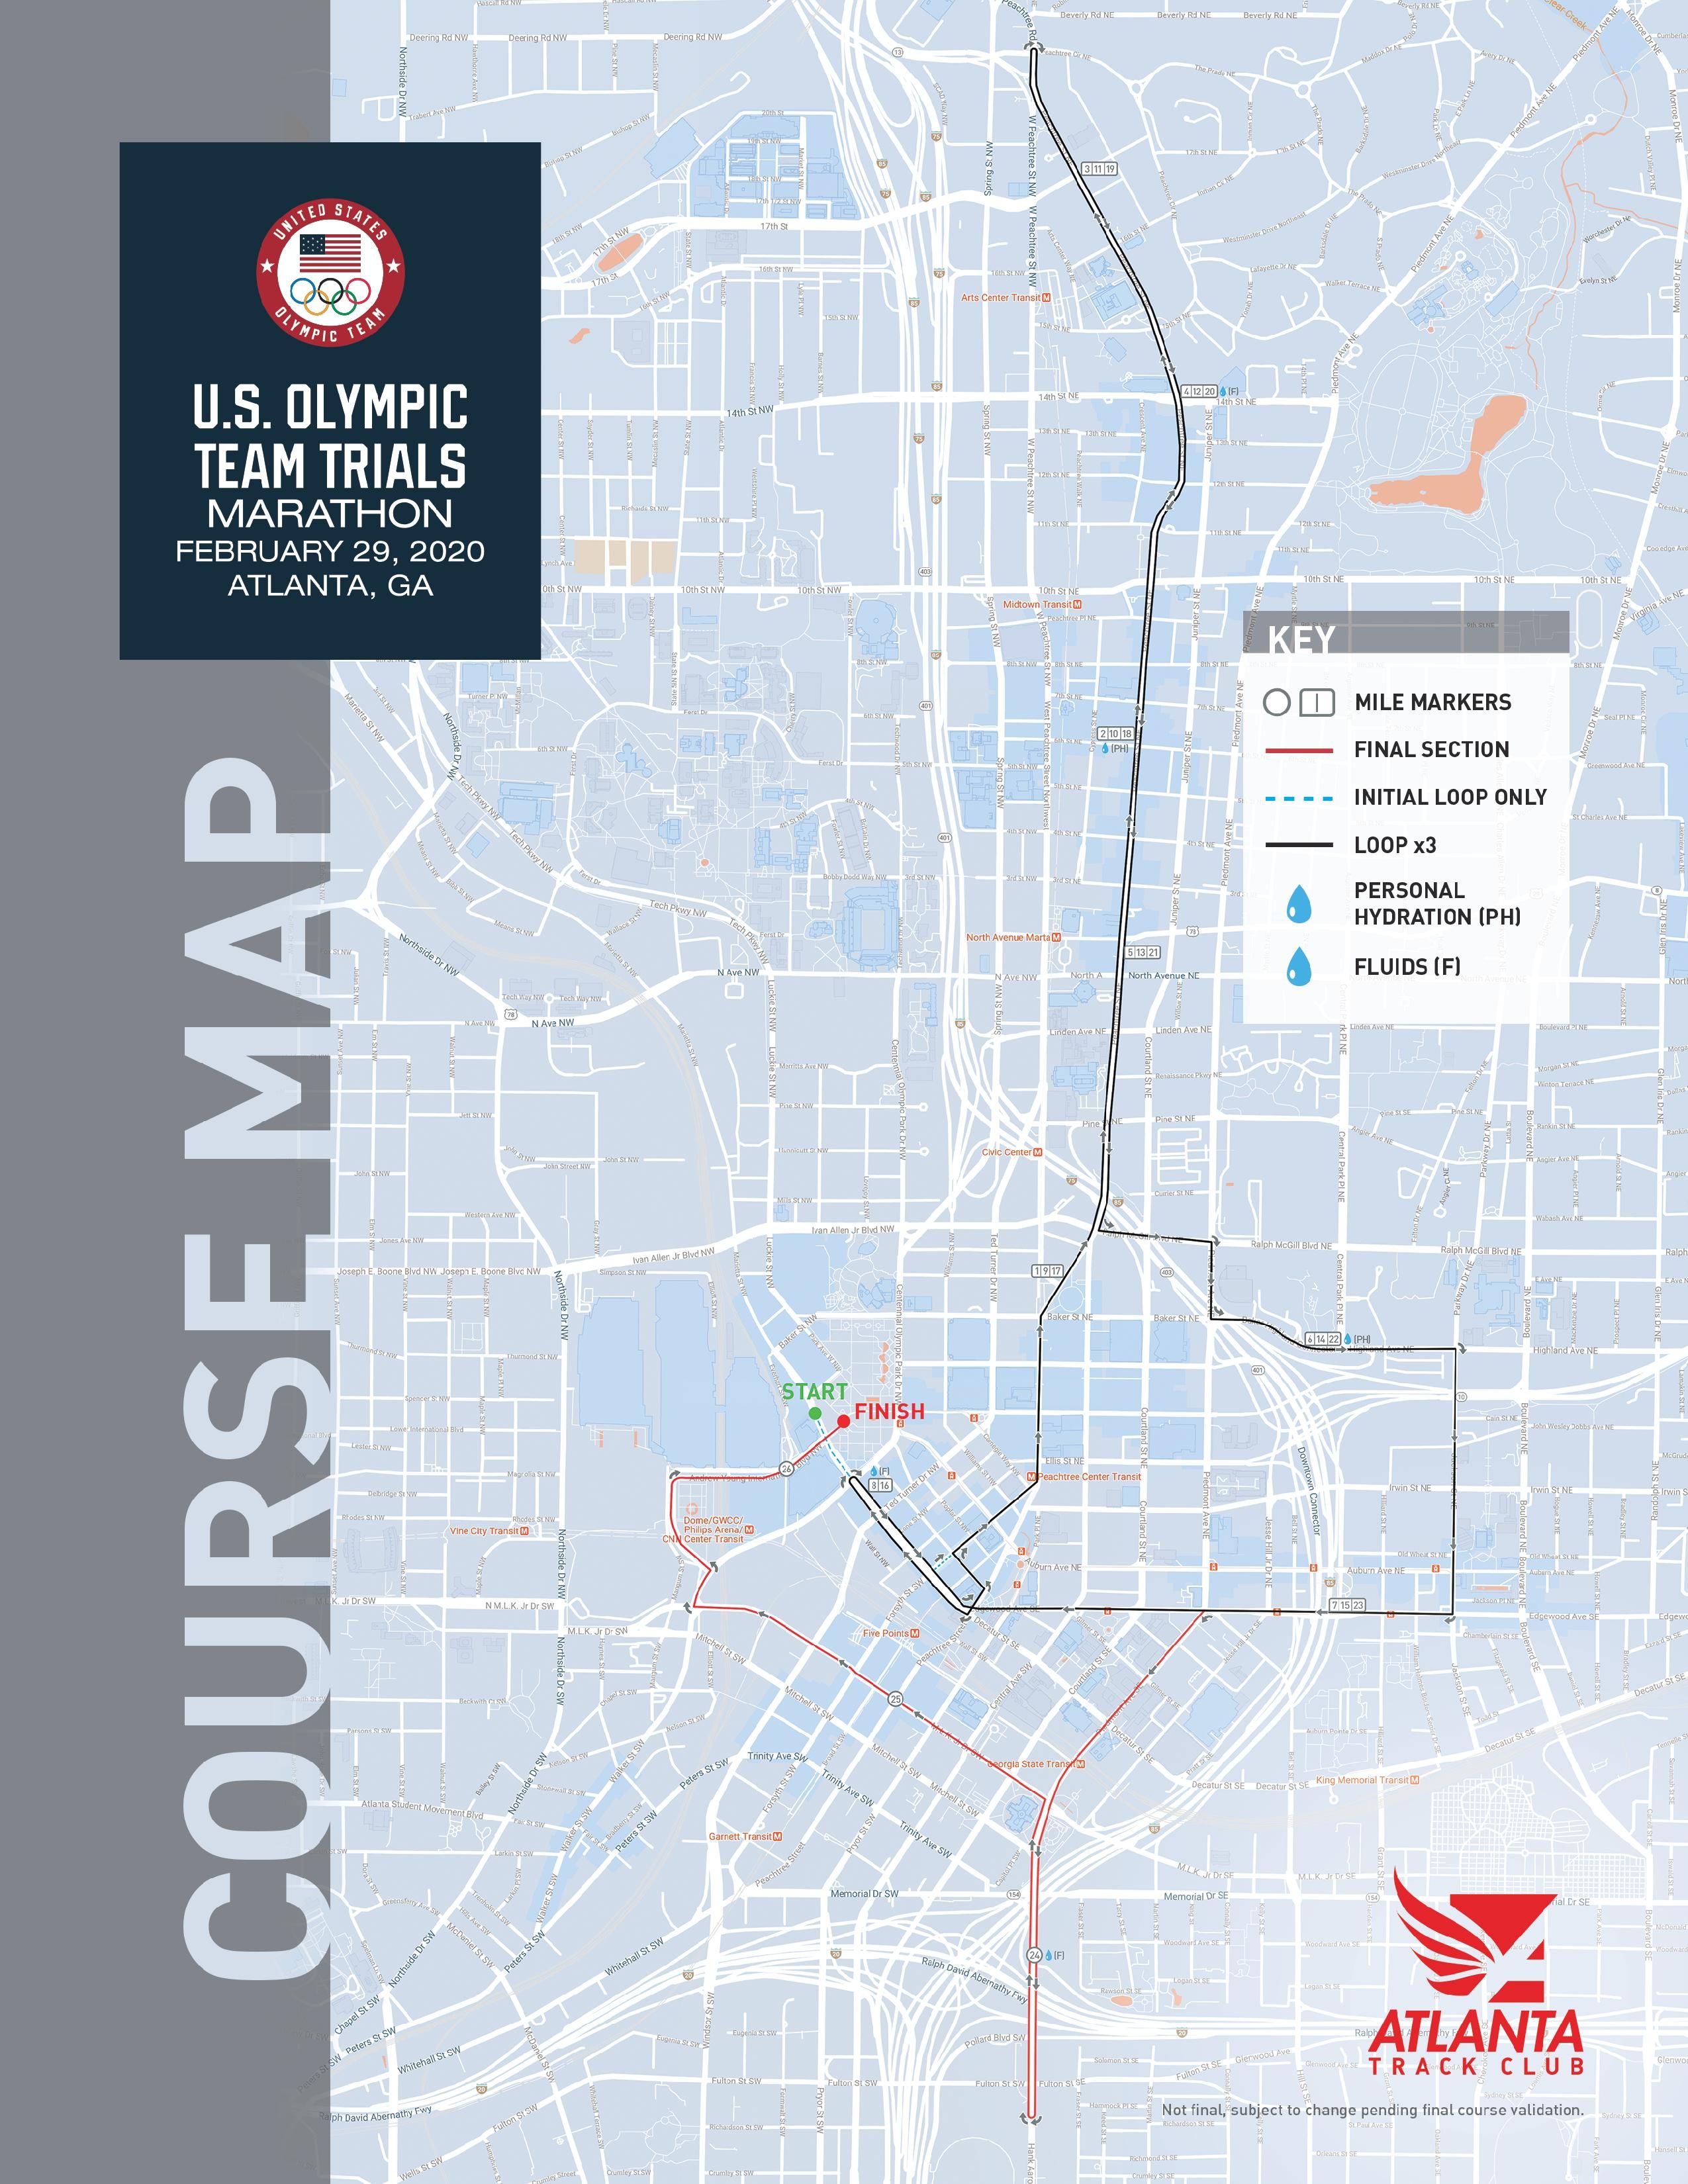 Course Adjustments Announced for 2020 U.S. Olympic Team Trials